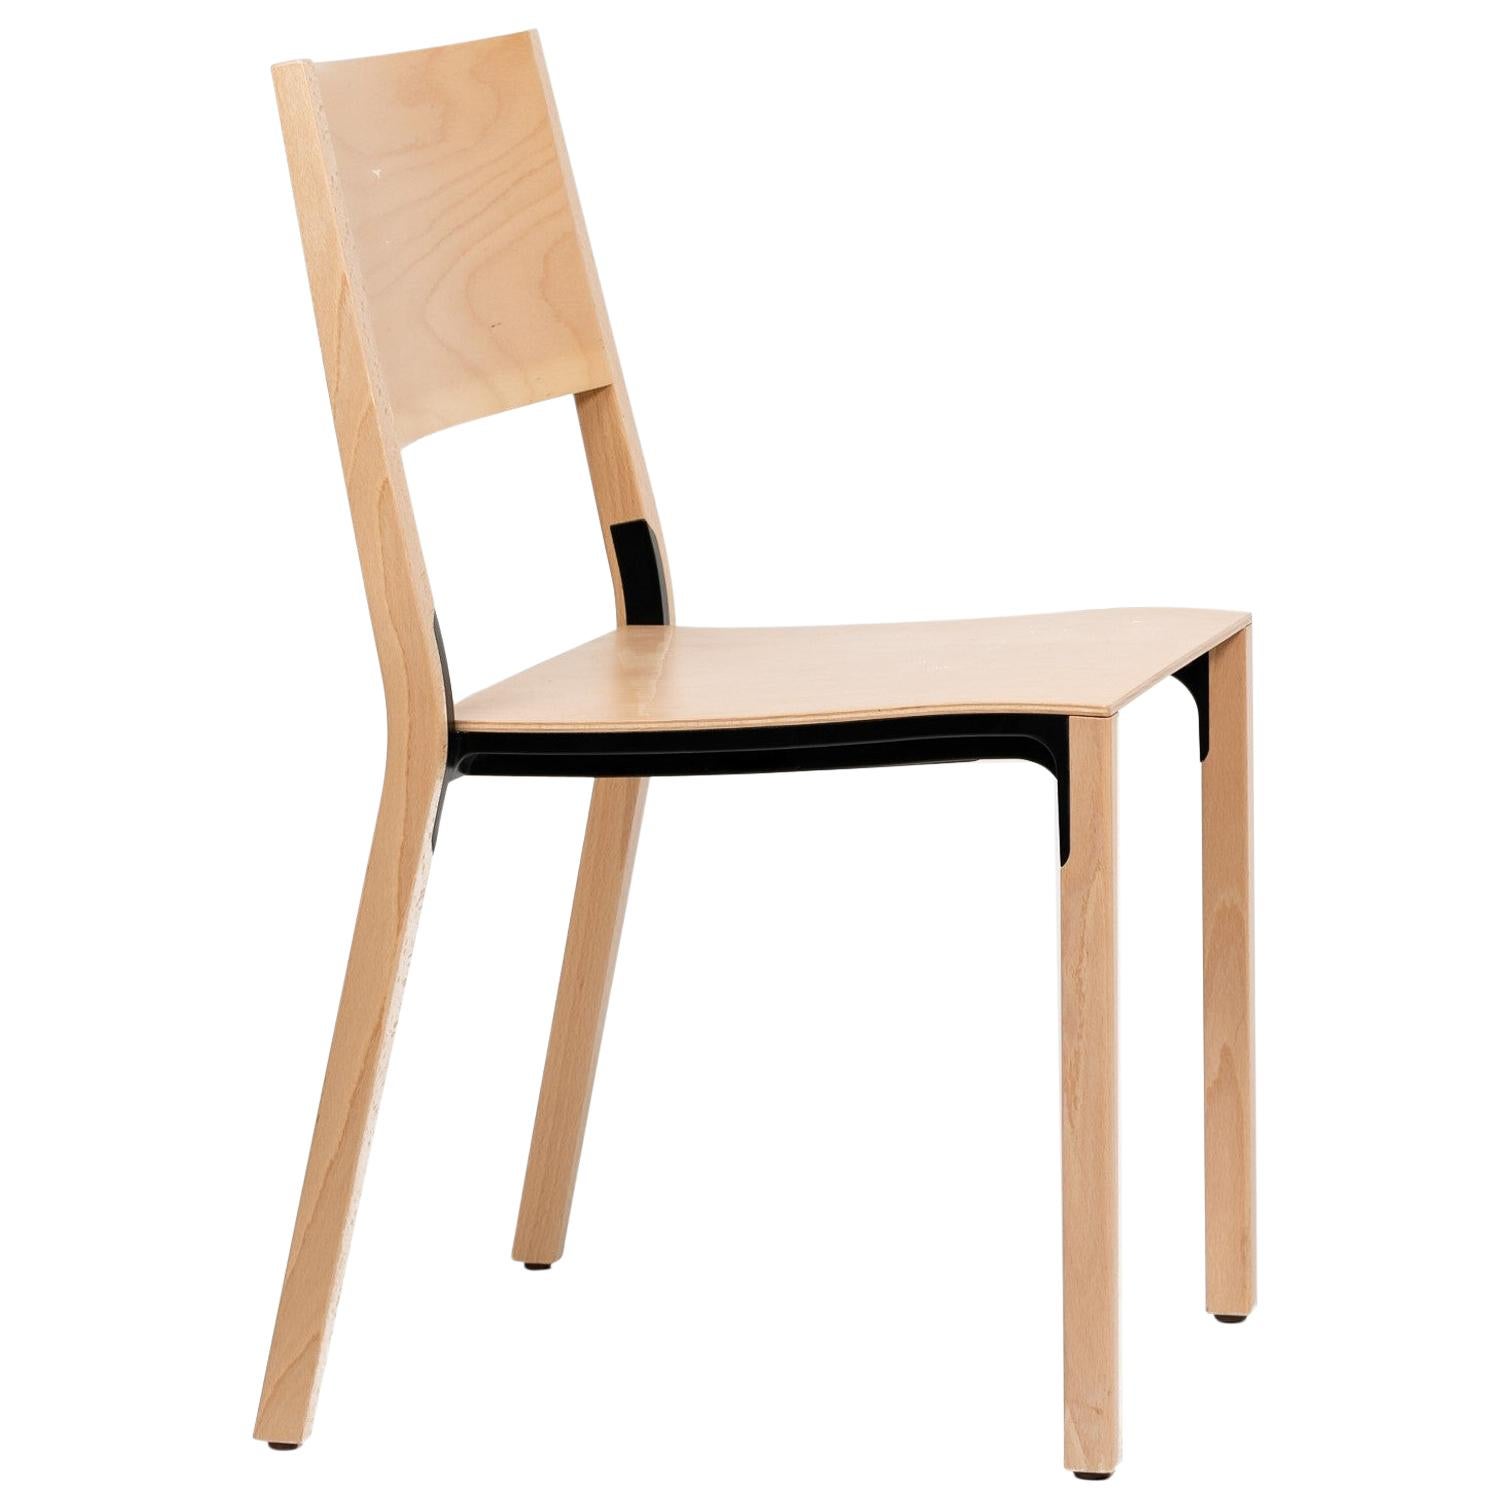 End of series

Base is a favorite of architects. The chair is a high-end piece of engineering with its aluminum die-cast frame, and the wood/metal screw-less patented connection from Dietiker.

Designed by Greutmann Bolzern in 2003.

In 1984, Carmen